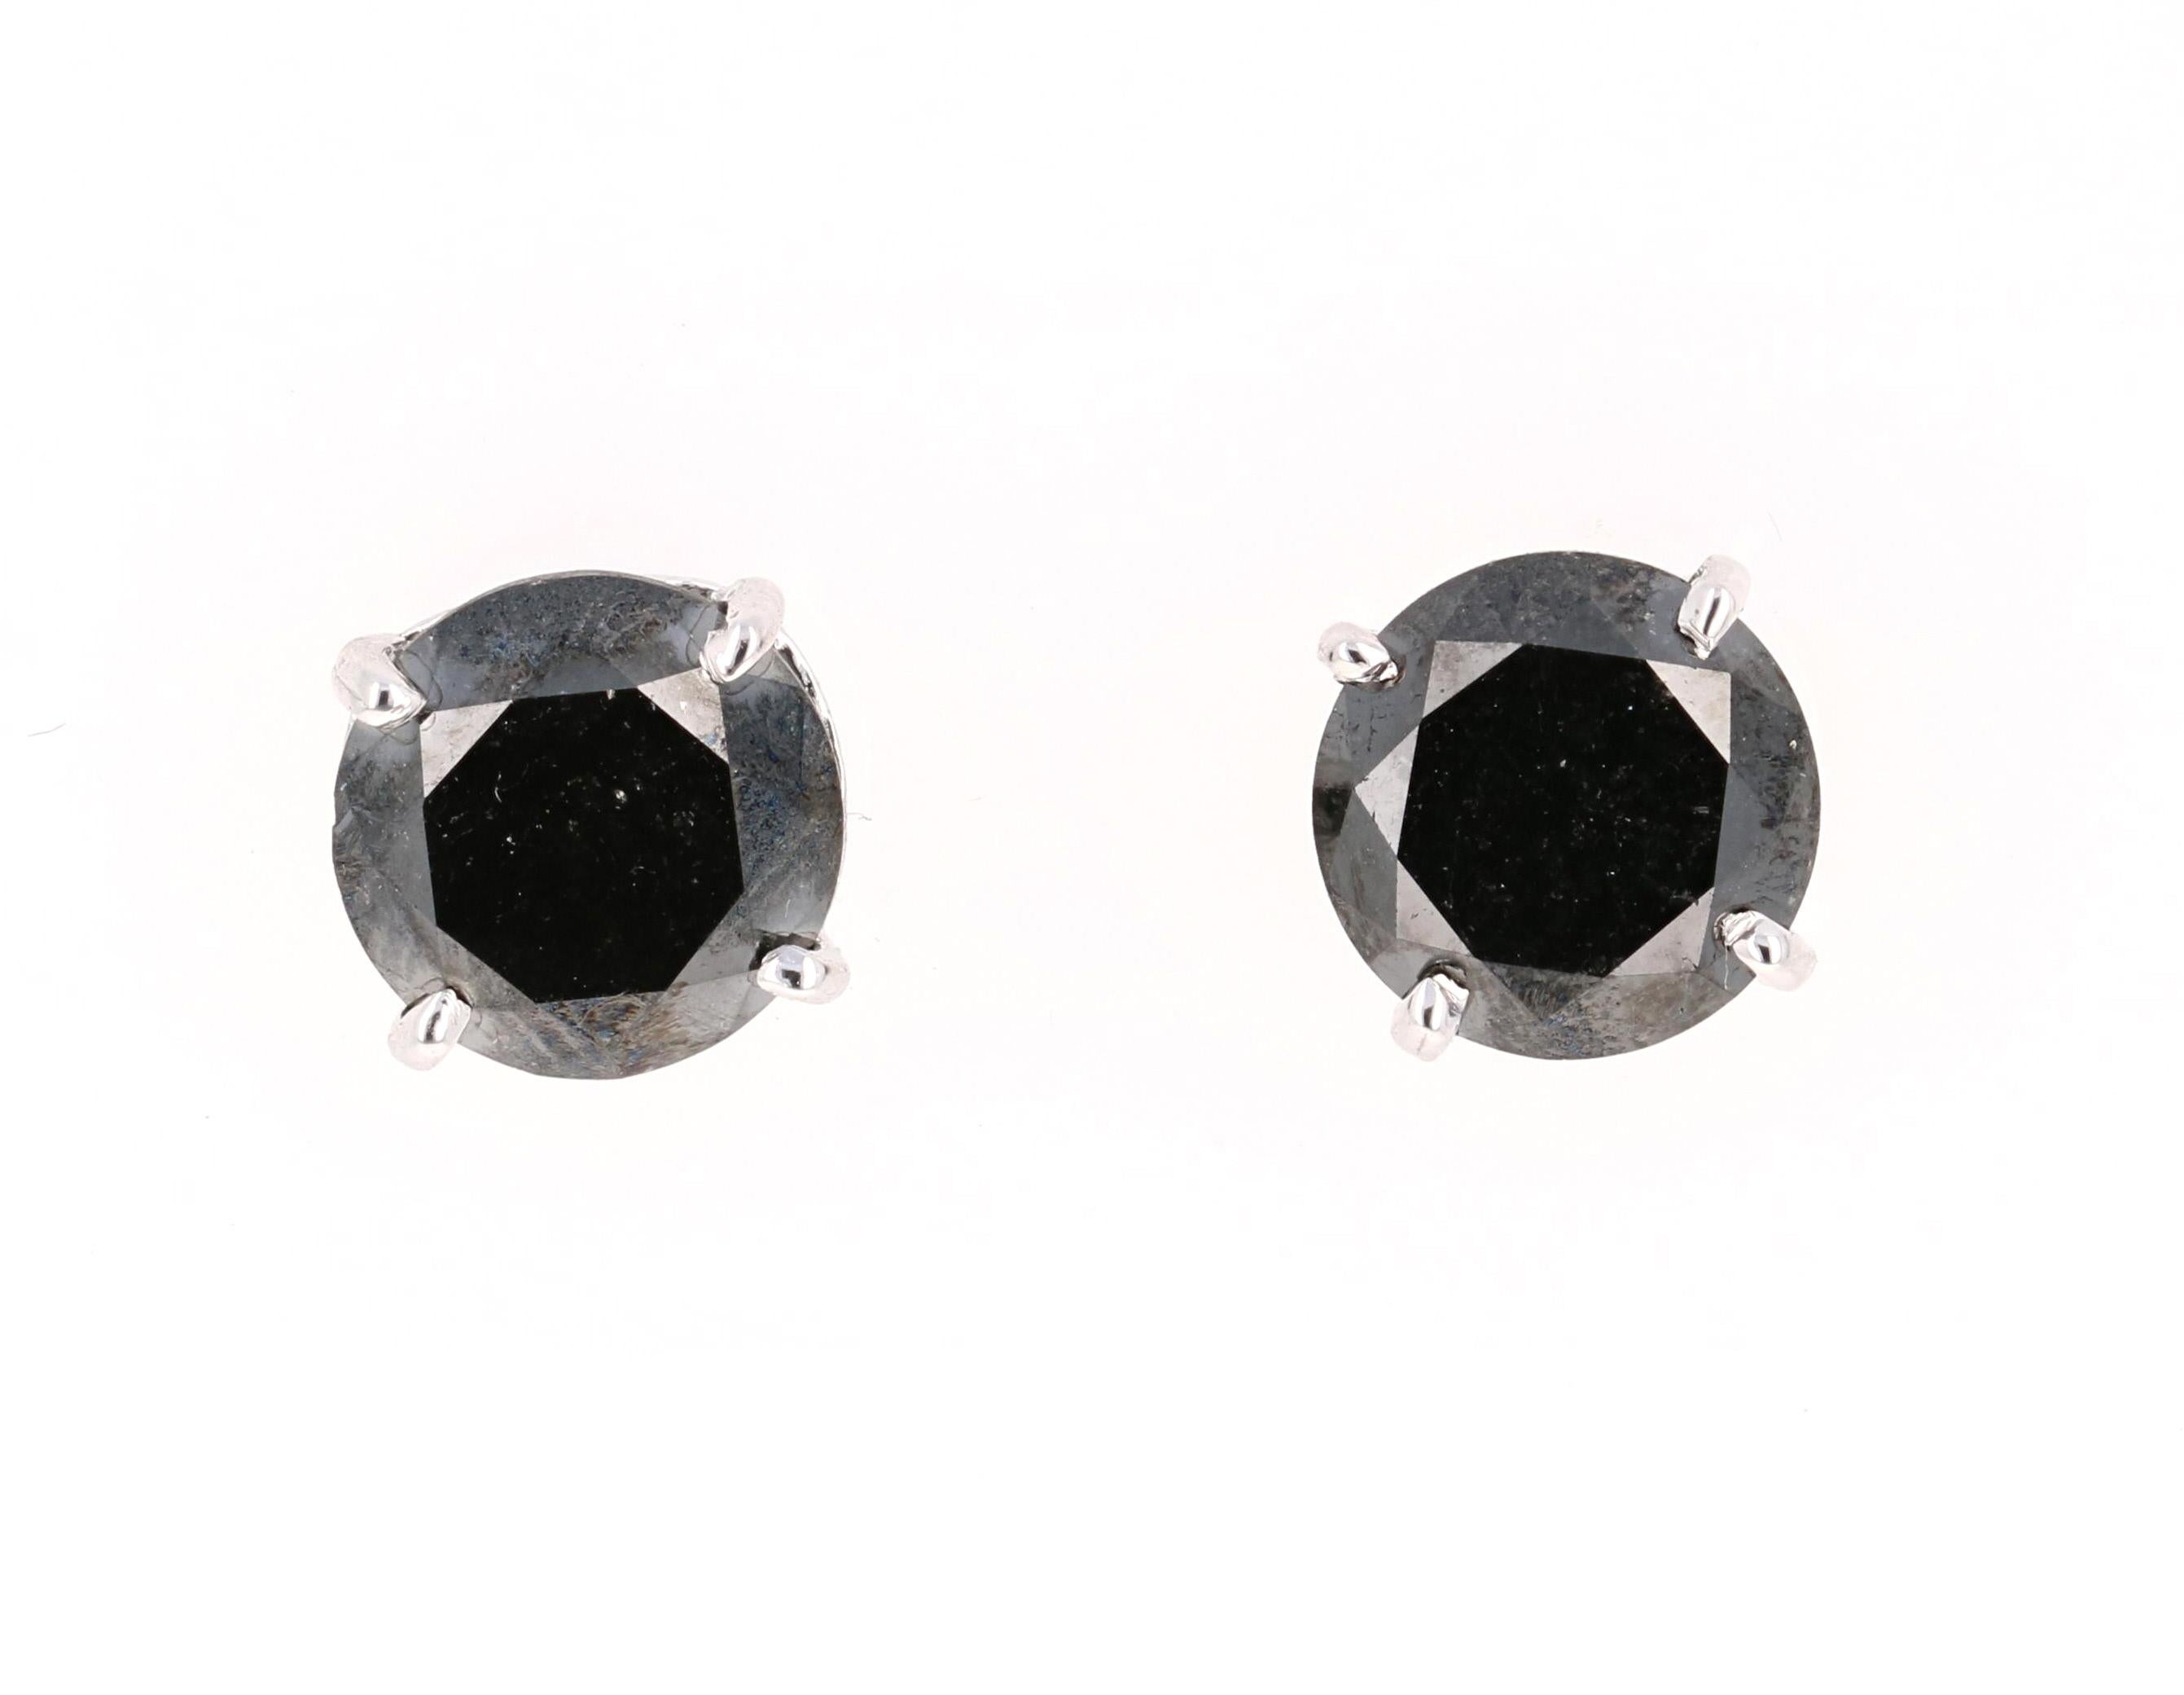 Bomb Black Diamond Studs!

These fun & versatile stud earrings have 2 Black Round Cut Diamonds that weigh 5.56 Carats. 

Curated in 14 Karat White Gold and measure at approximately 9 mm. 
